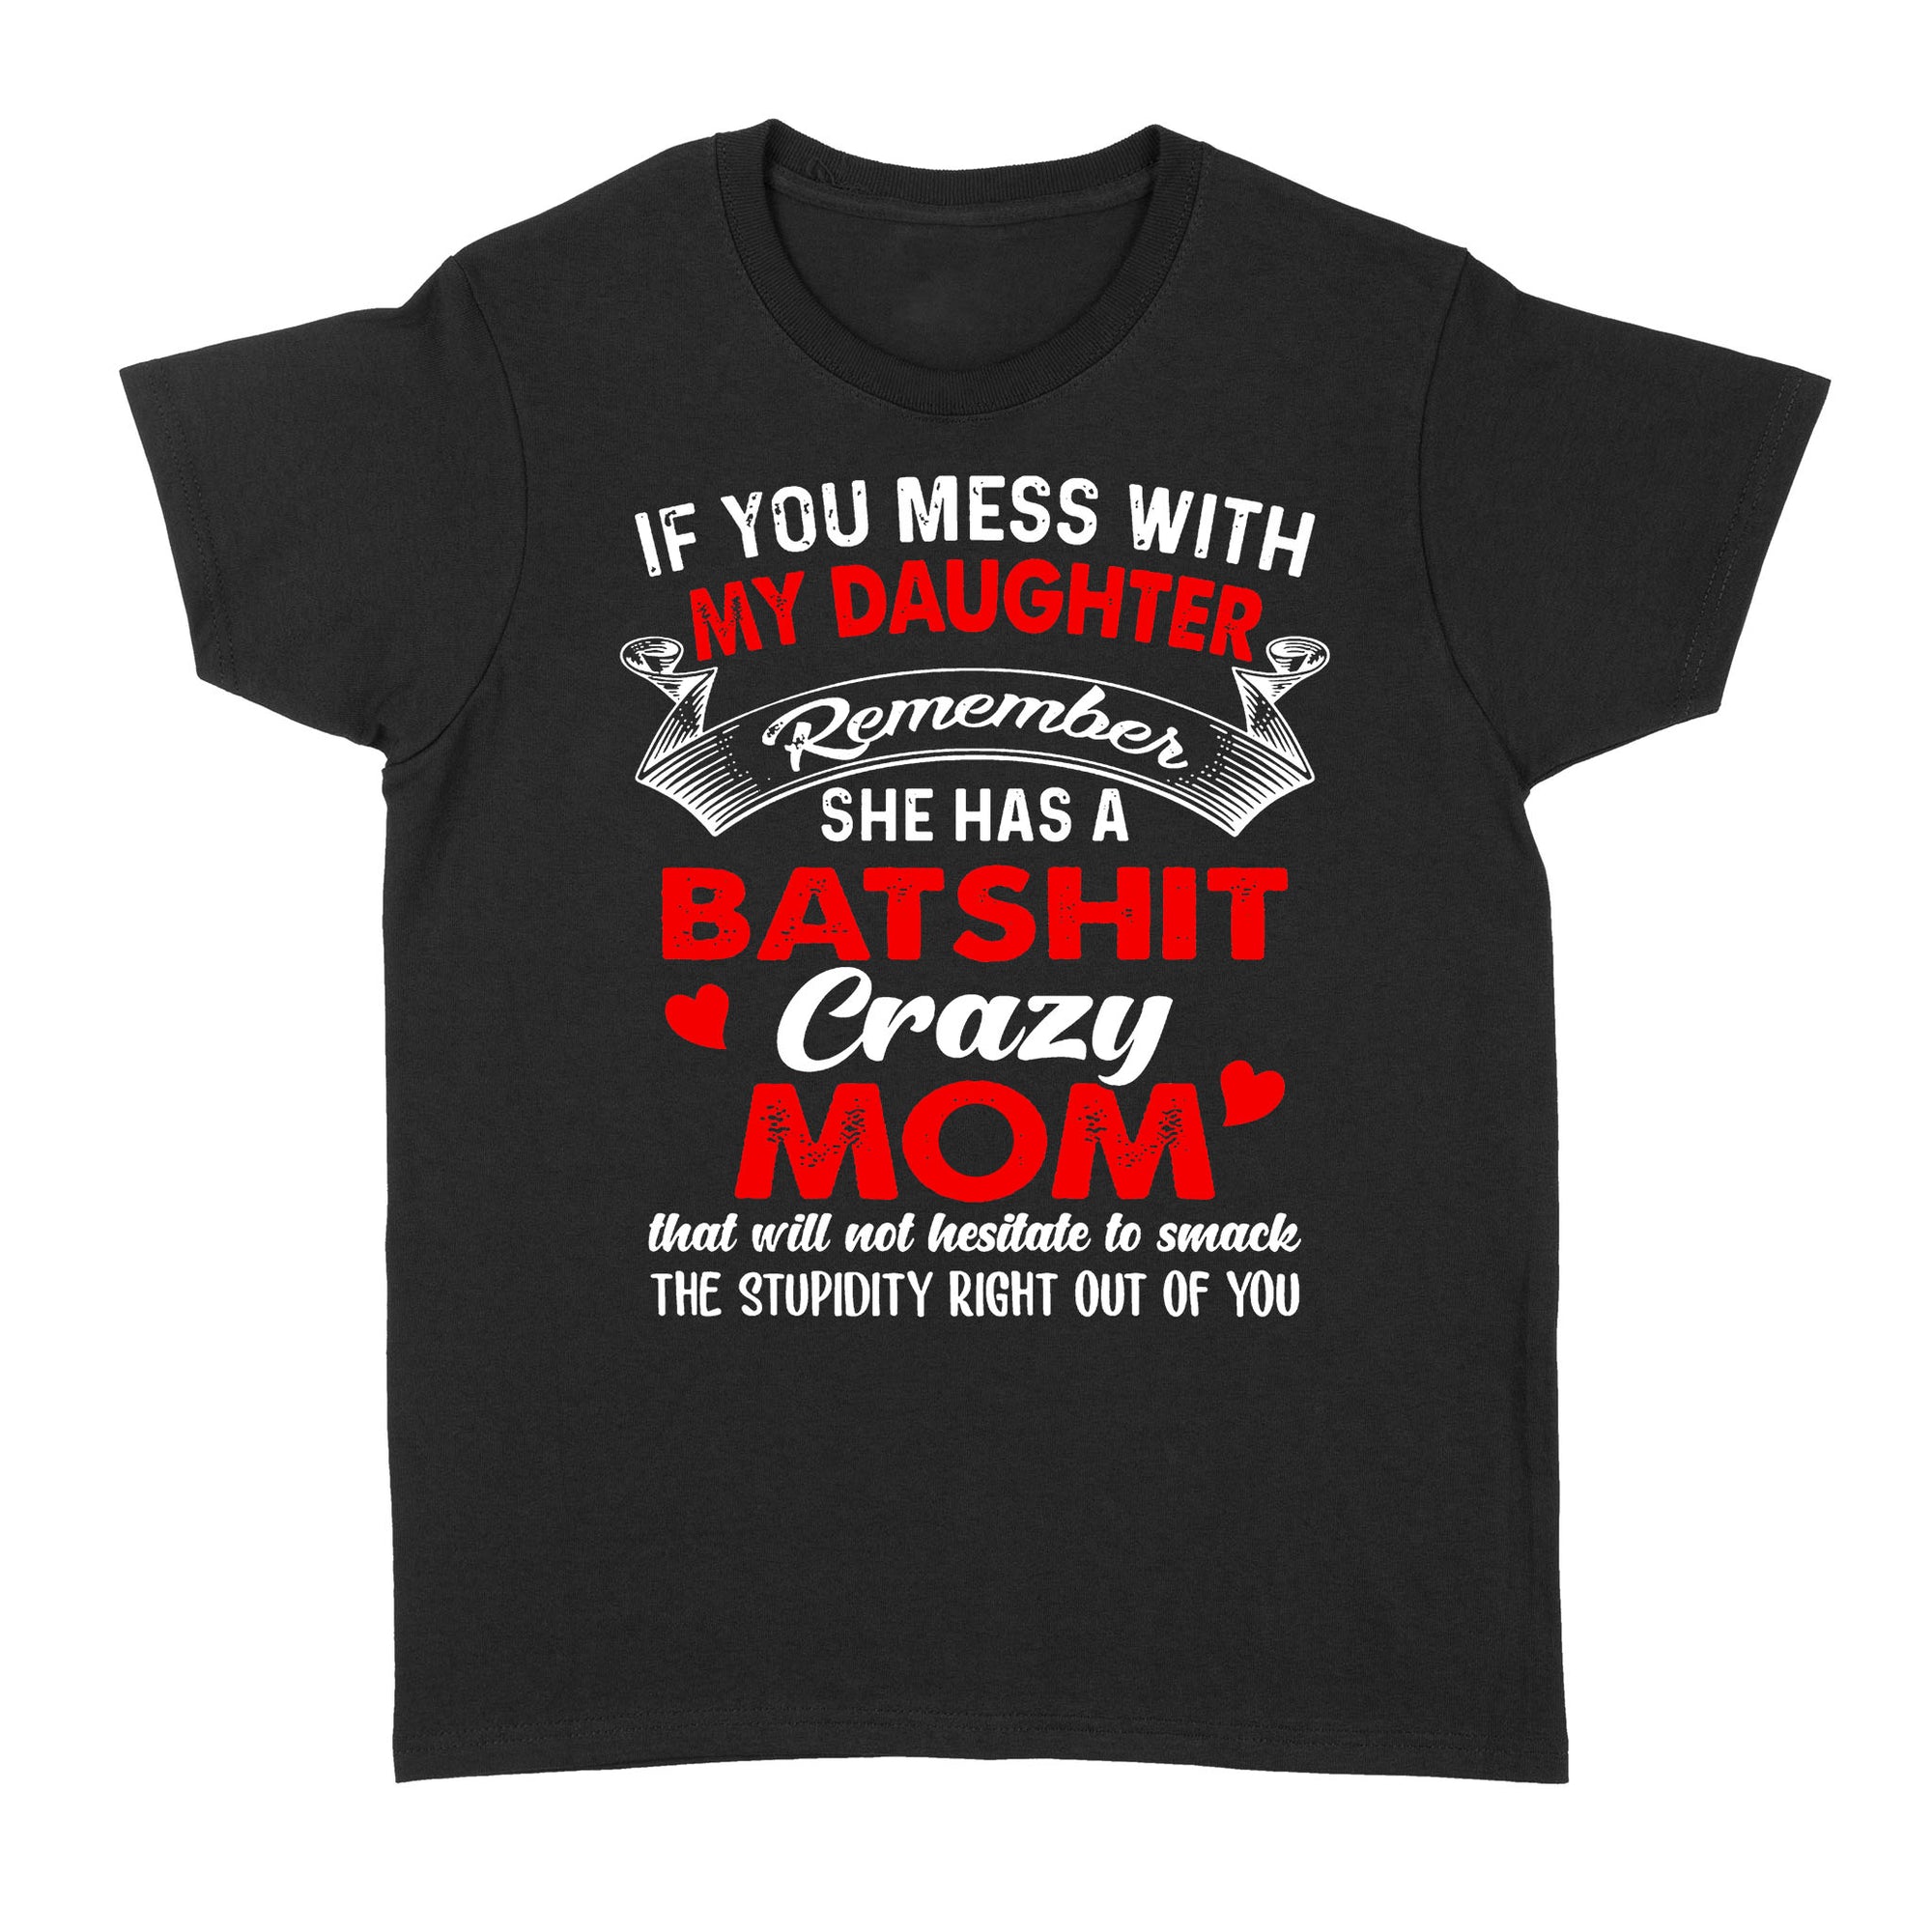 If You Mess With My Daughter Remember She Has A Batshit Crazy Mom That Will Not Hesitate To Smack The Stupidity Right Out Of You (w) - Standard Women's T-shirt